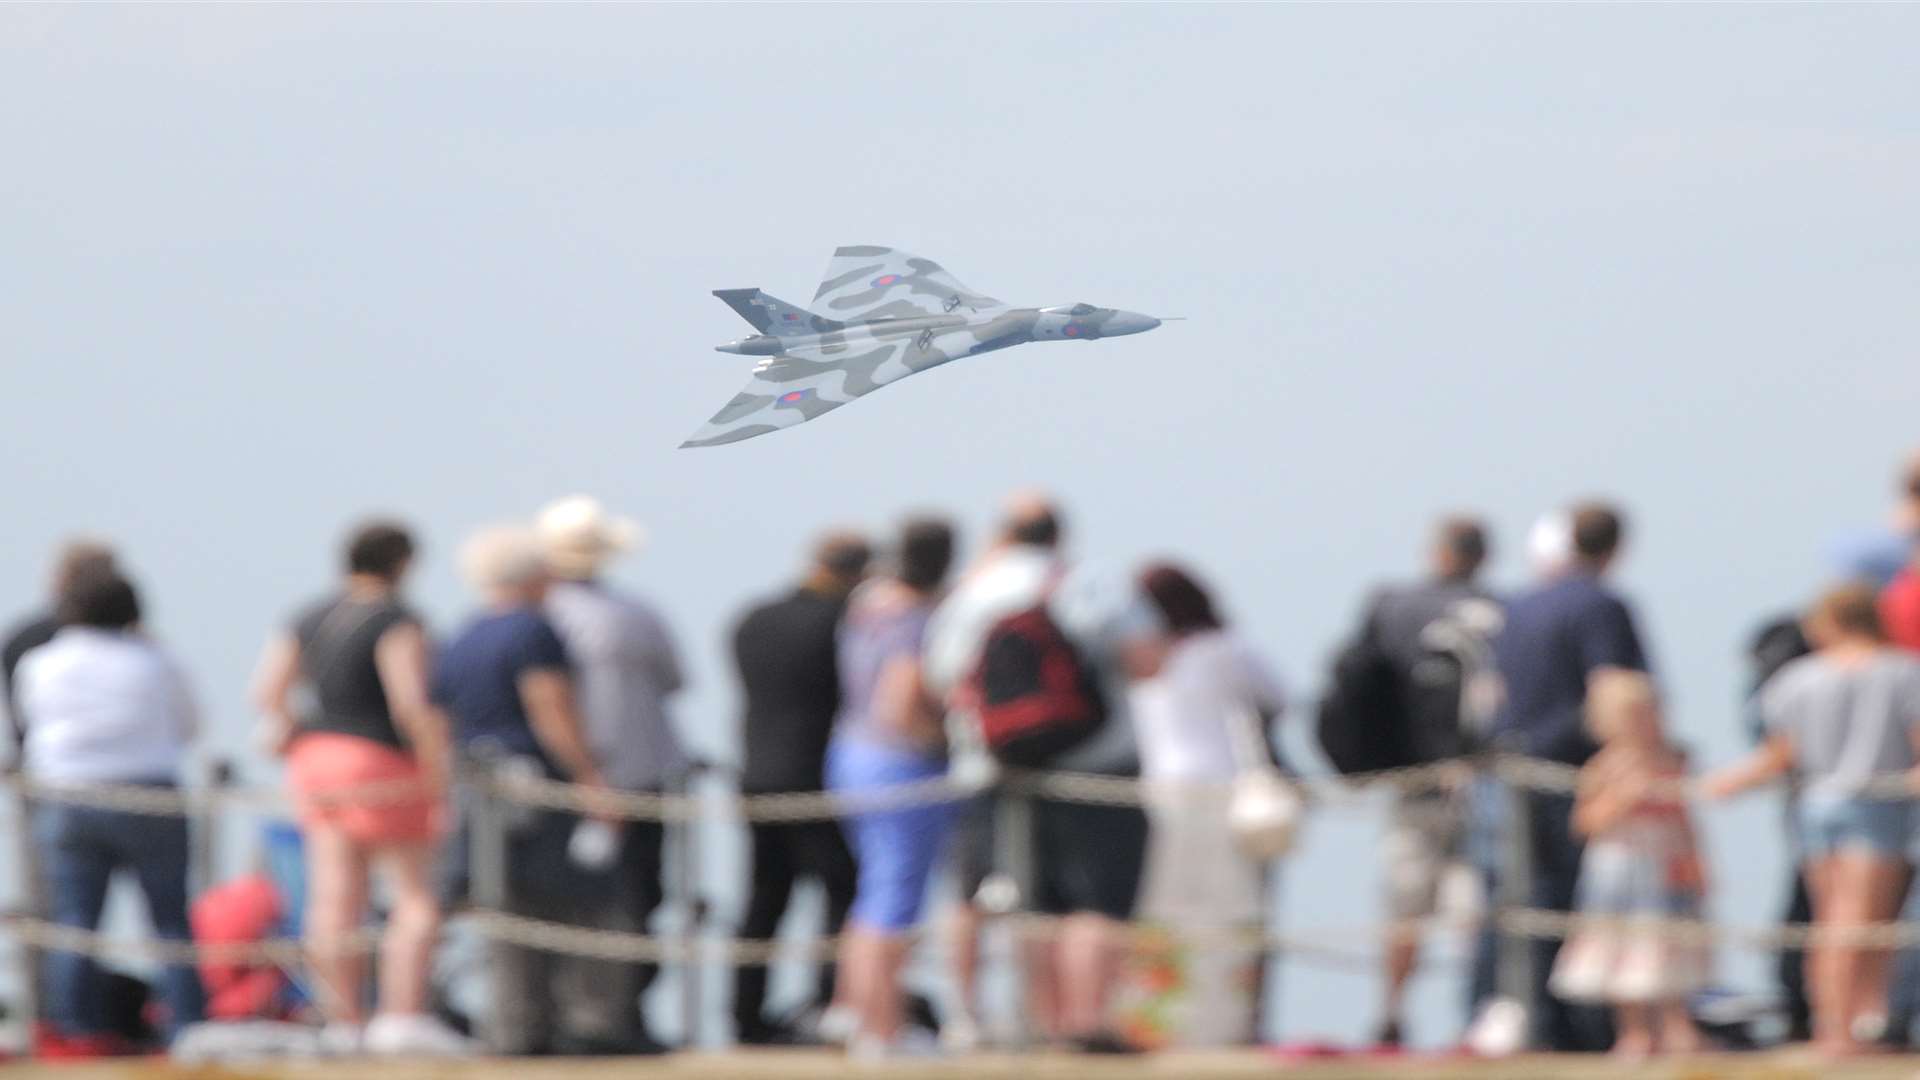 Visitors at Herne Bay gather to watch the airshow